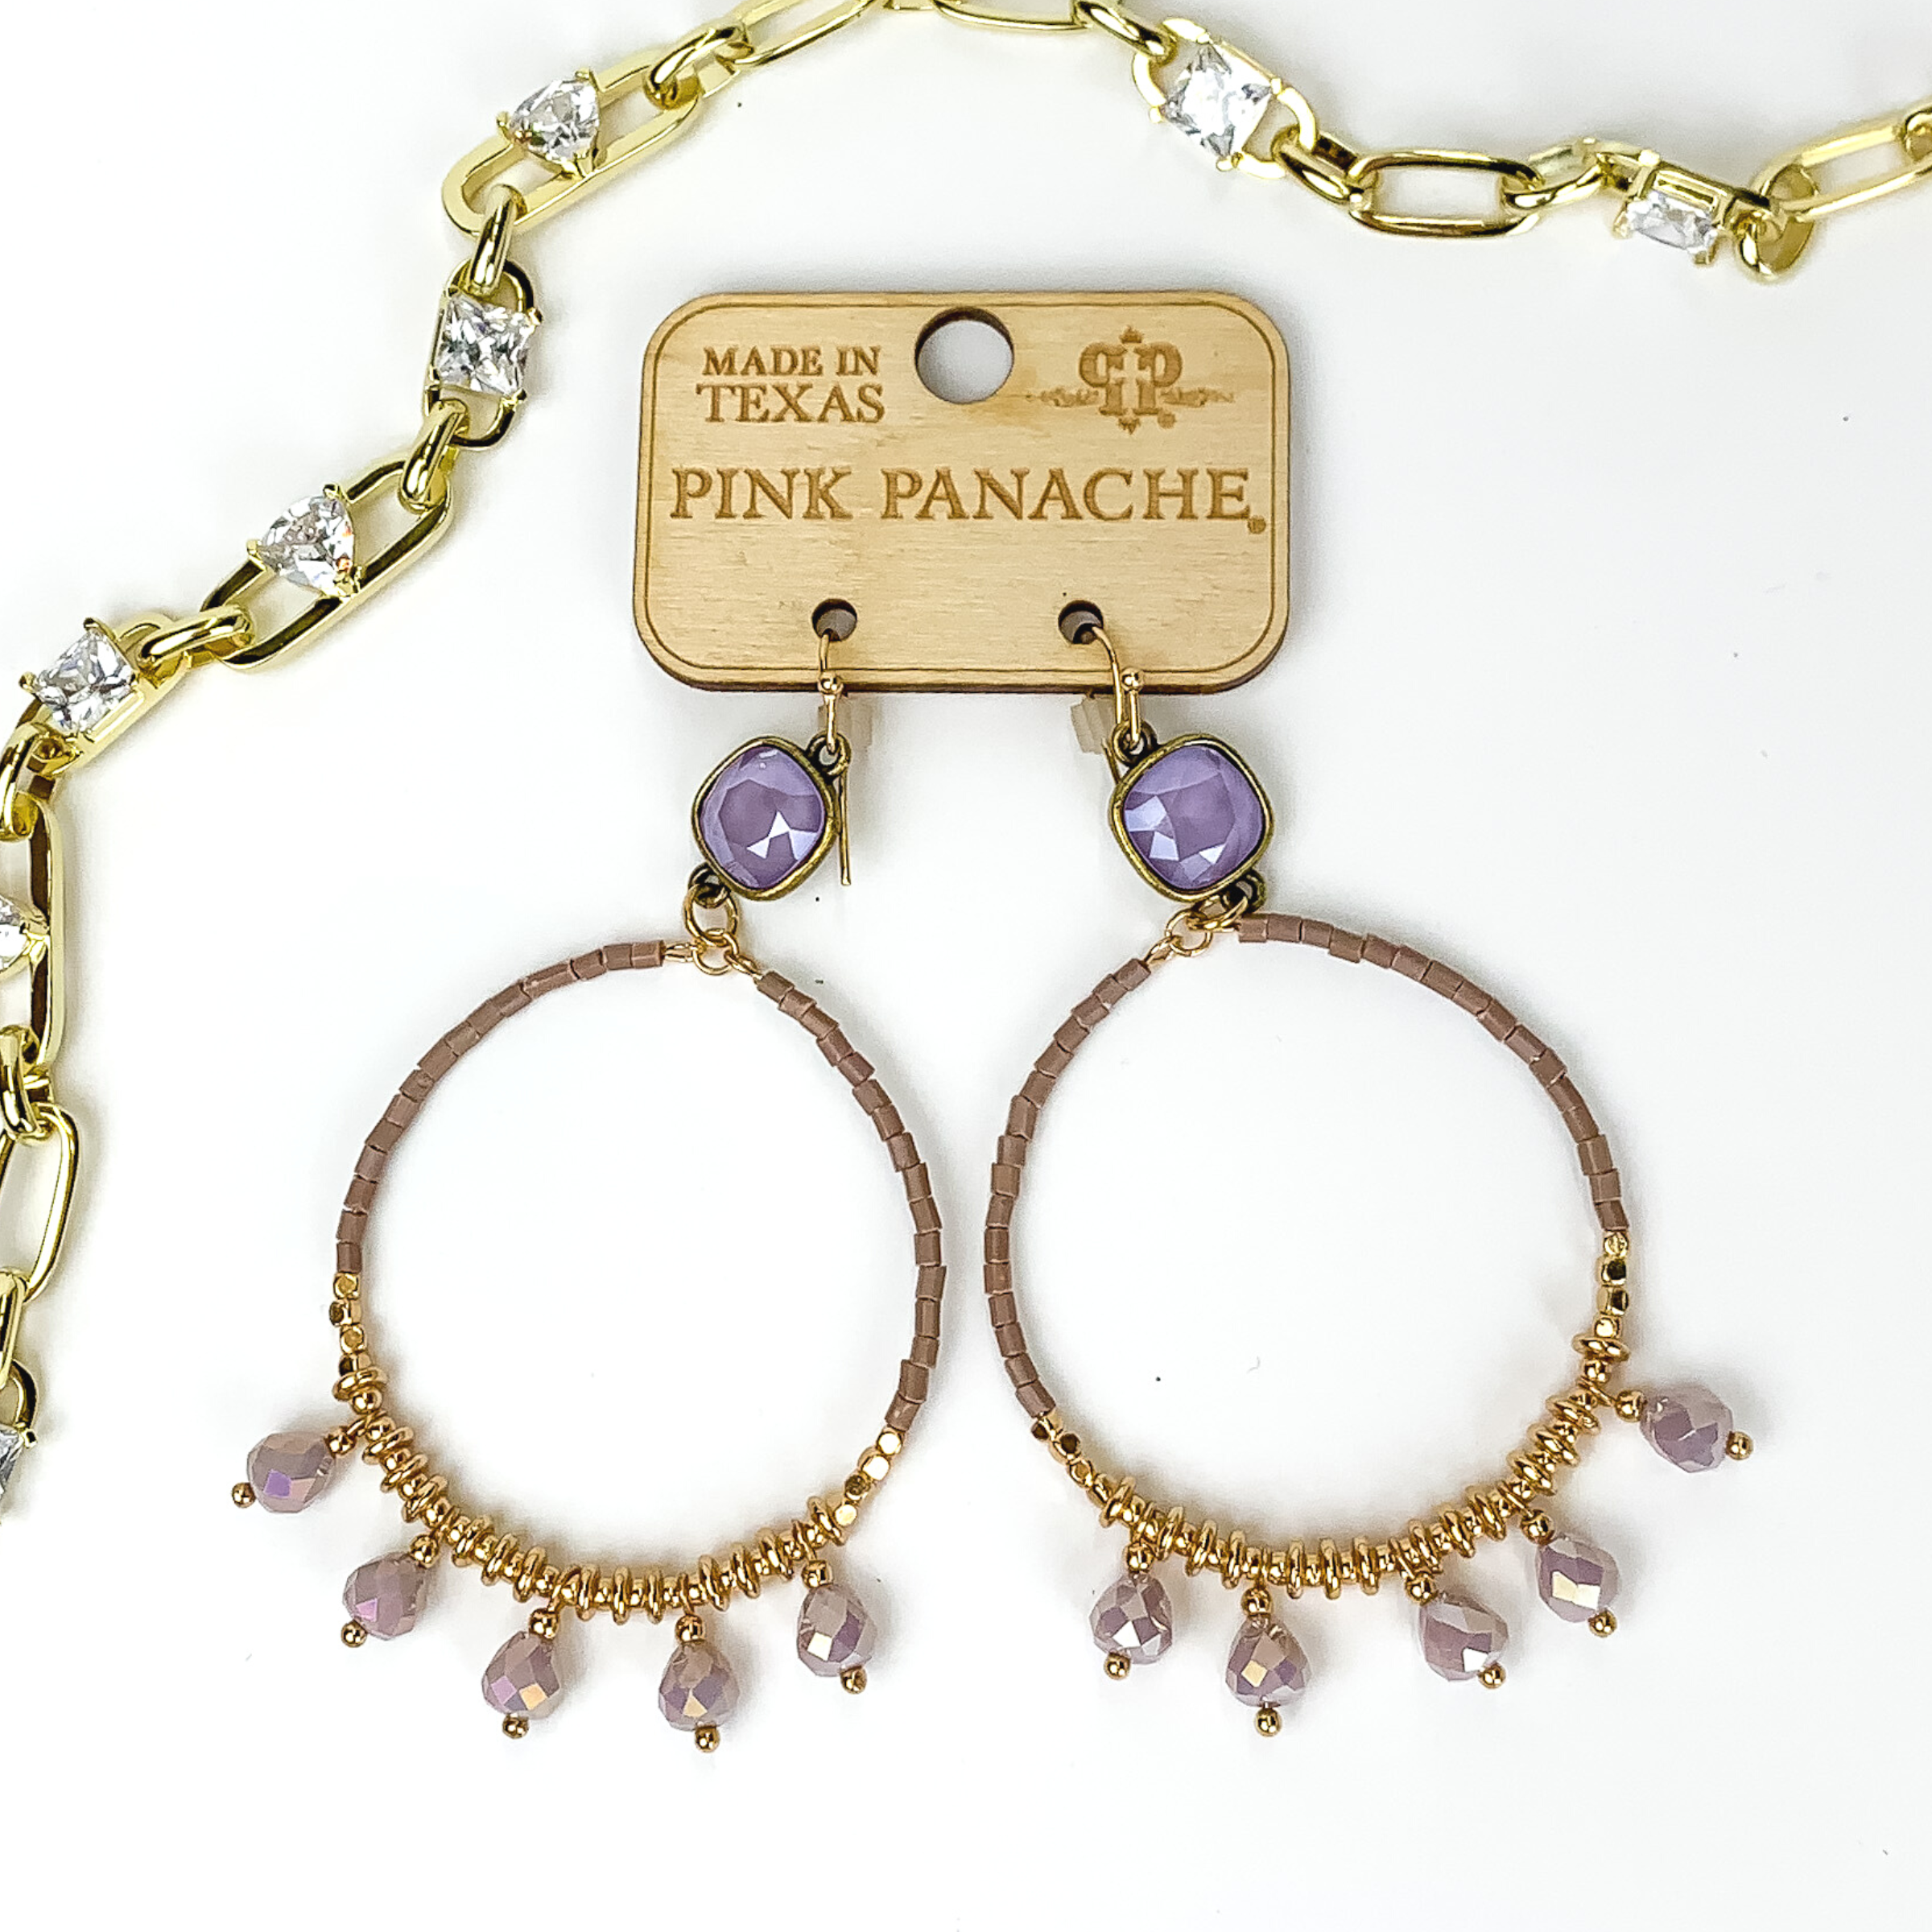 Lavender crystal square stud drop earrings with lavender beaded circle pendant. The circle pendant includes lavender beads, gold beads, and lilac hanging charms. These earrings are pictured on a top of a mauve colored book on a white background. 